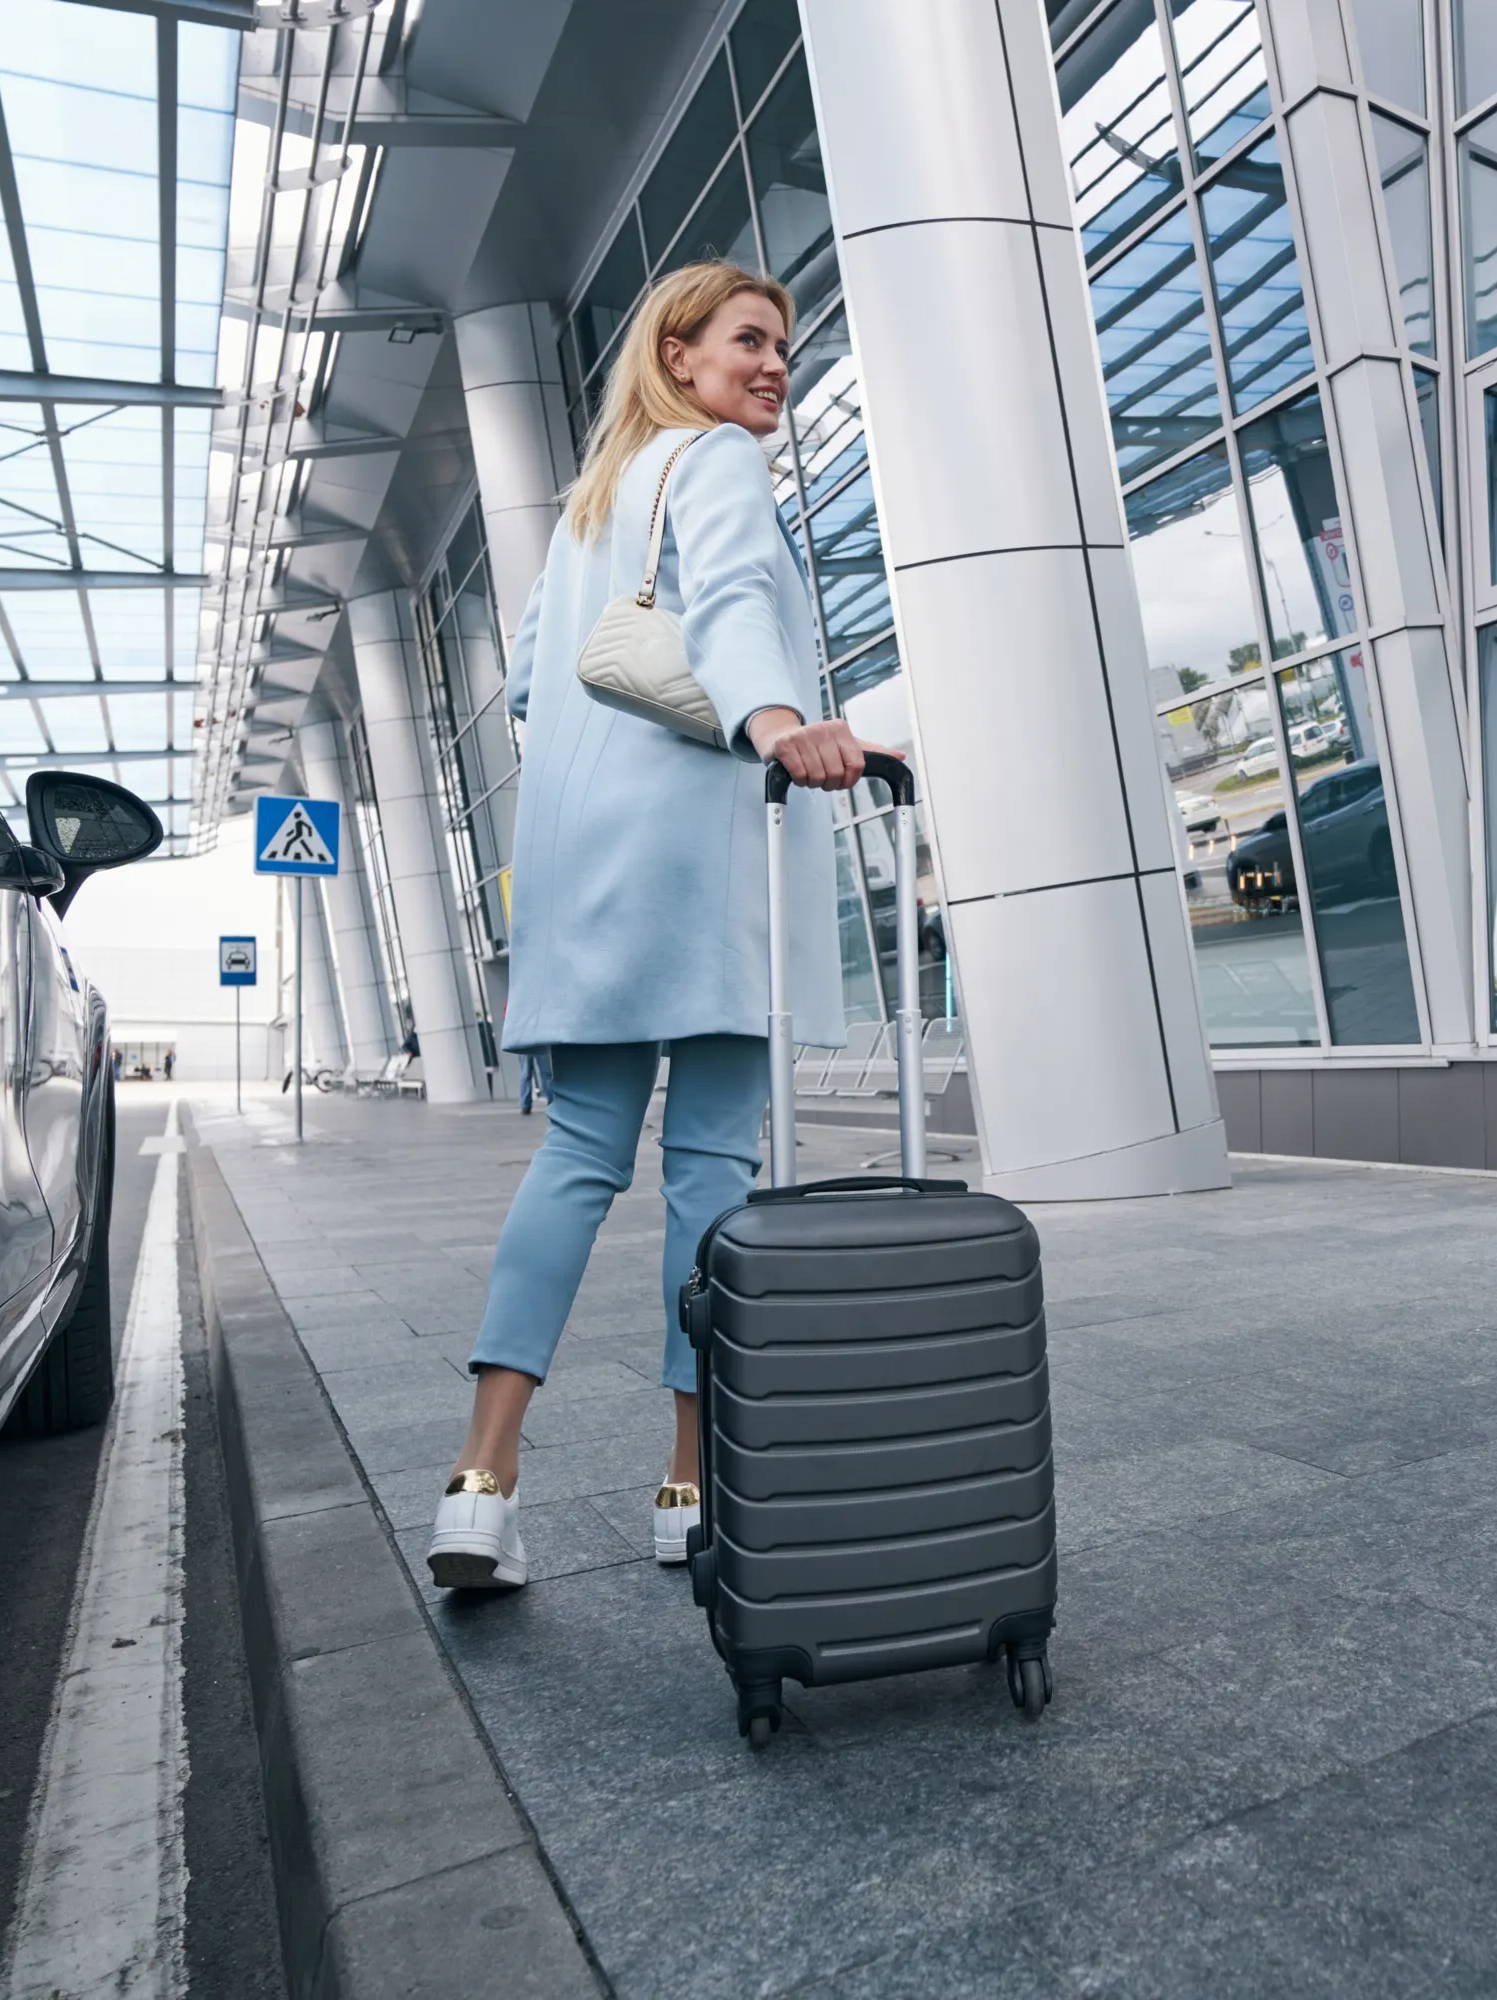 Woman getting out of taxi with luggage, woman in airport